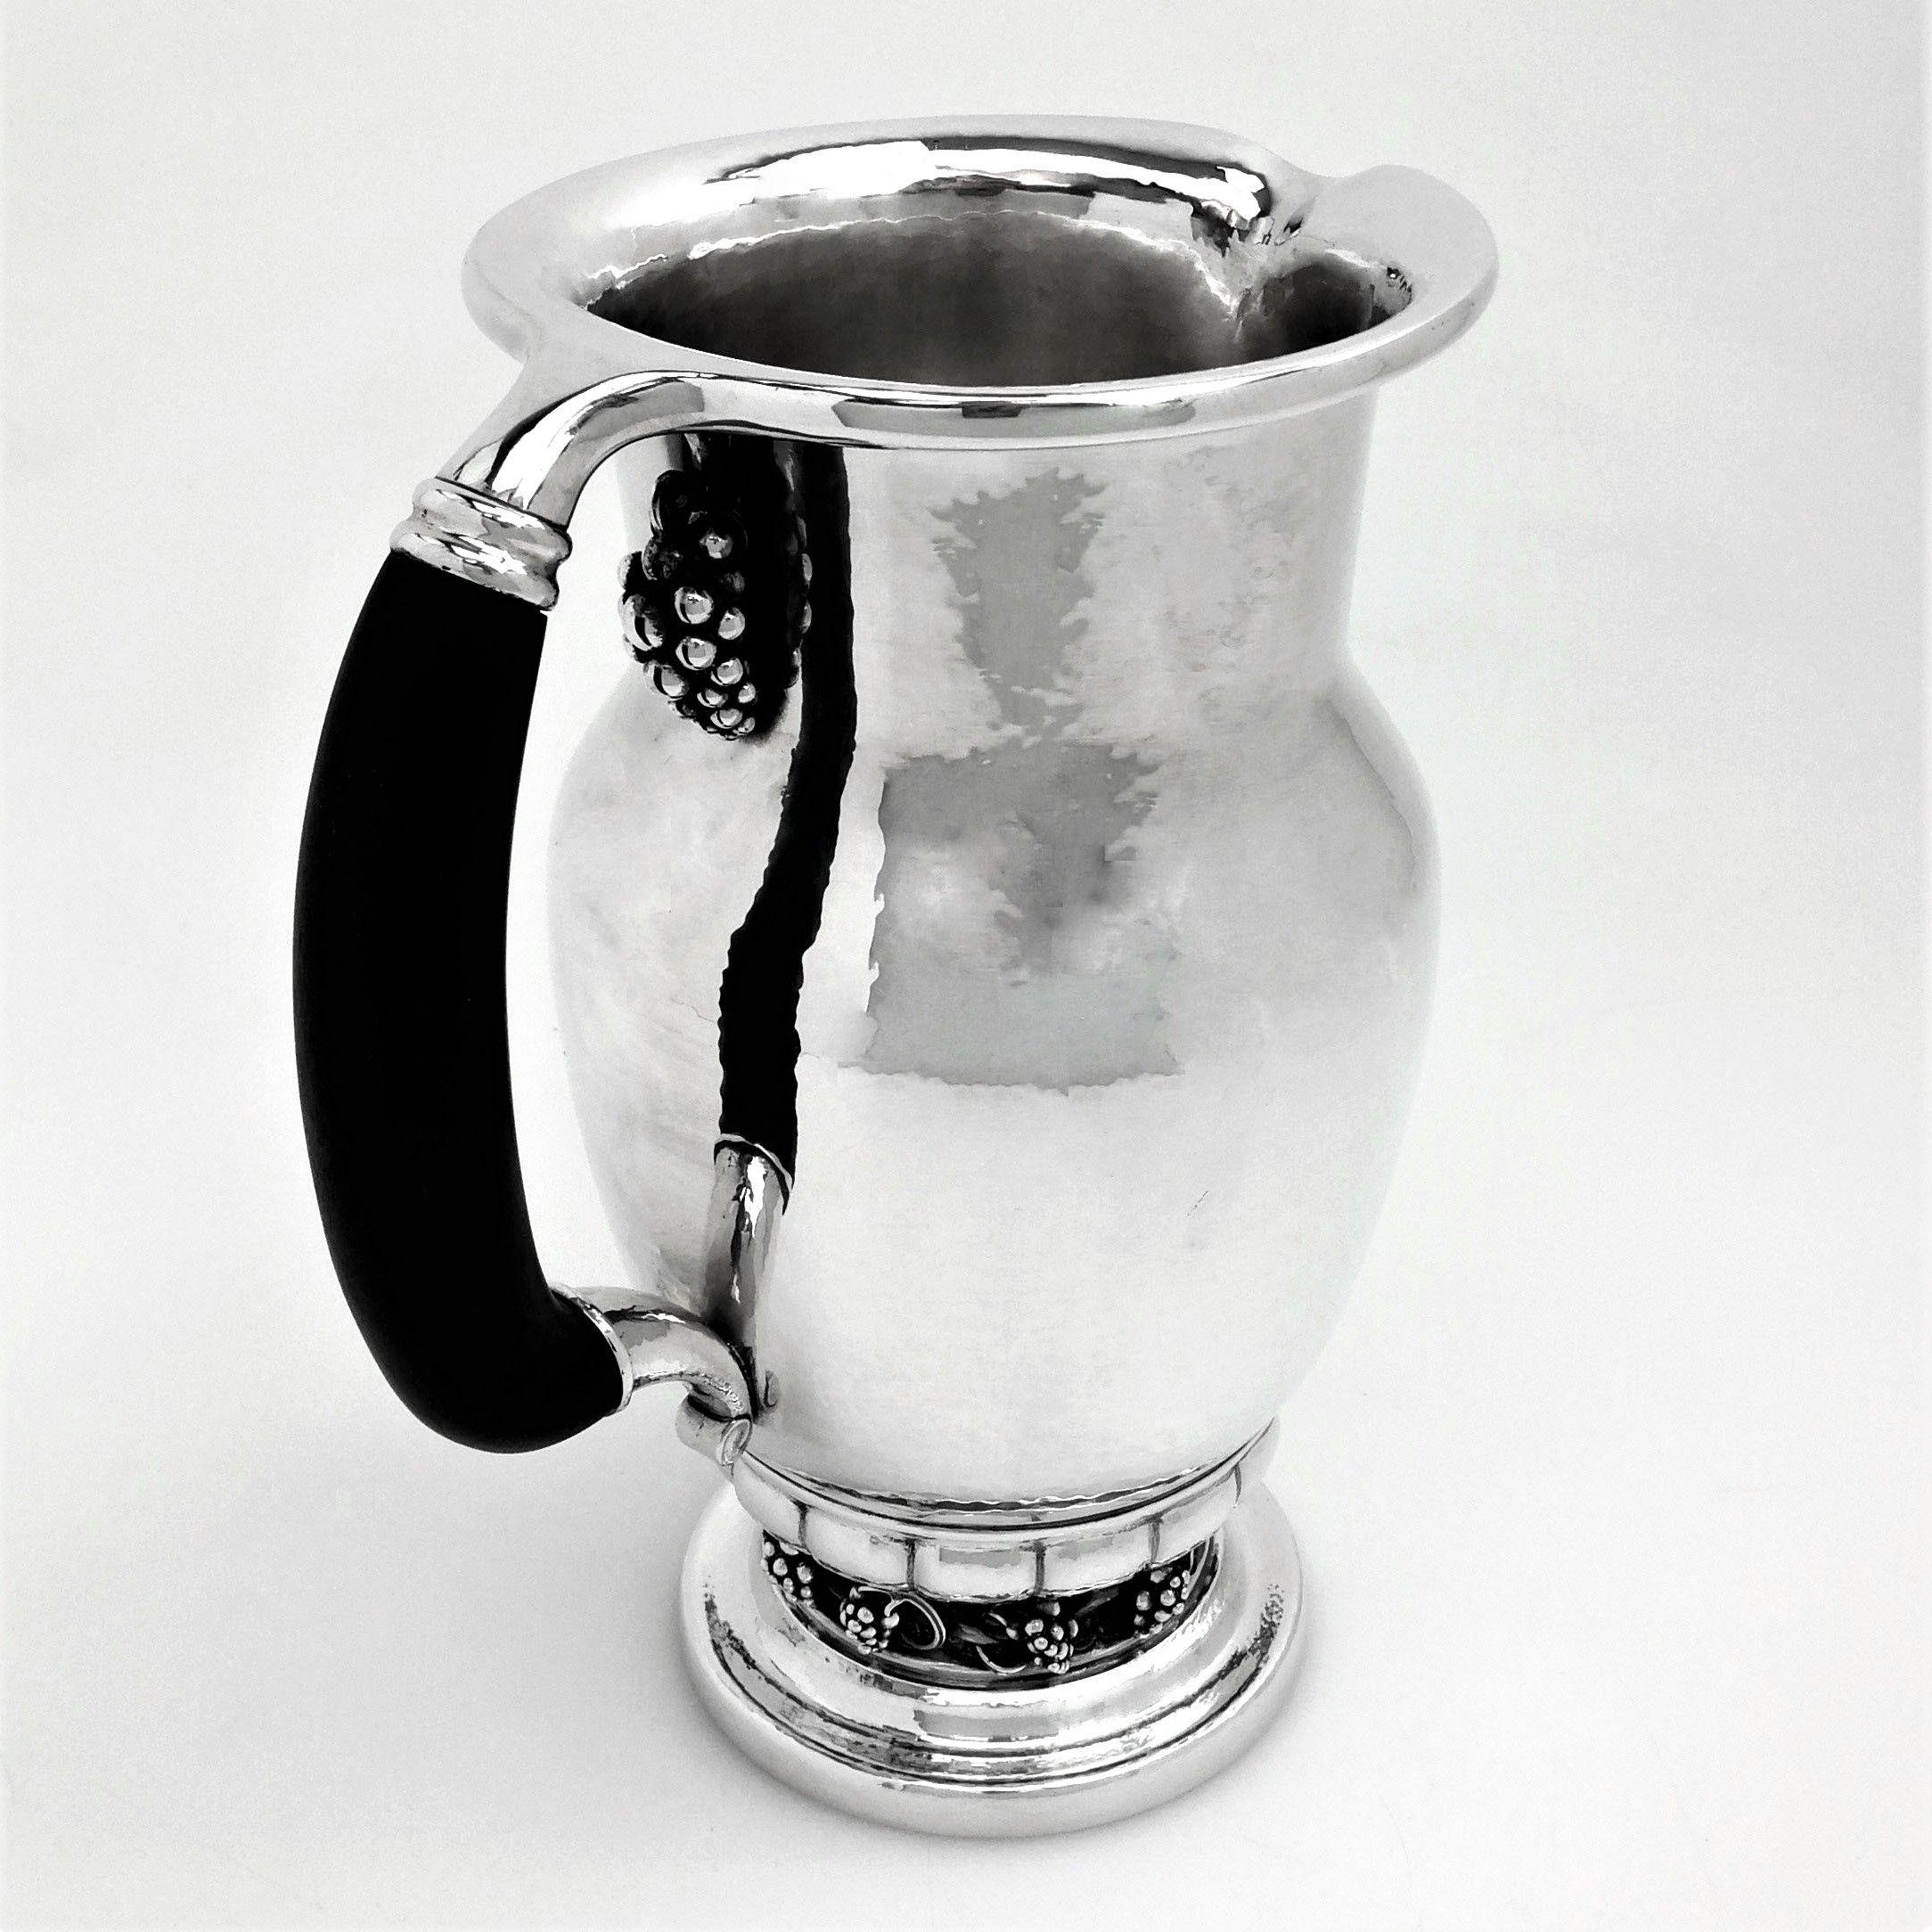 A magnificent sterling Silver Georg Jensen Jug with a wooden handle and embellished with a grape and vine motif. The Pitcher has a bunch of grapes below the handle on the upper lip and a band of grapes applied above the spread foot. The exterior of